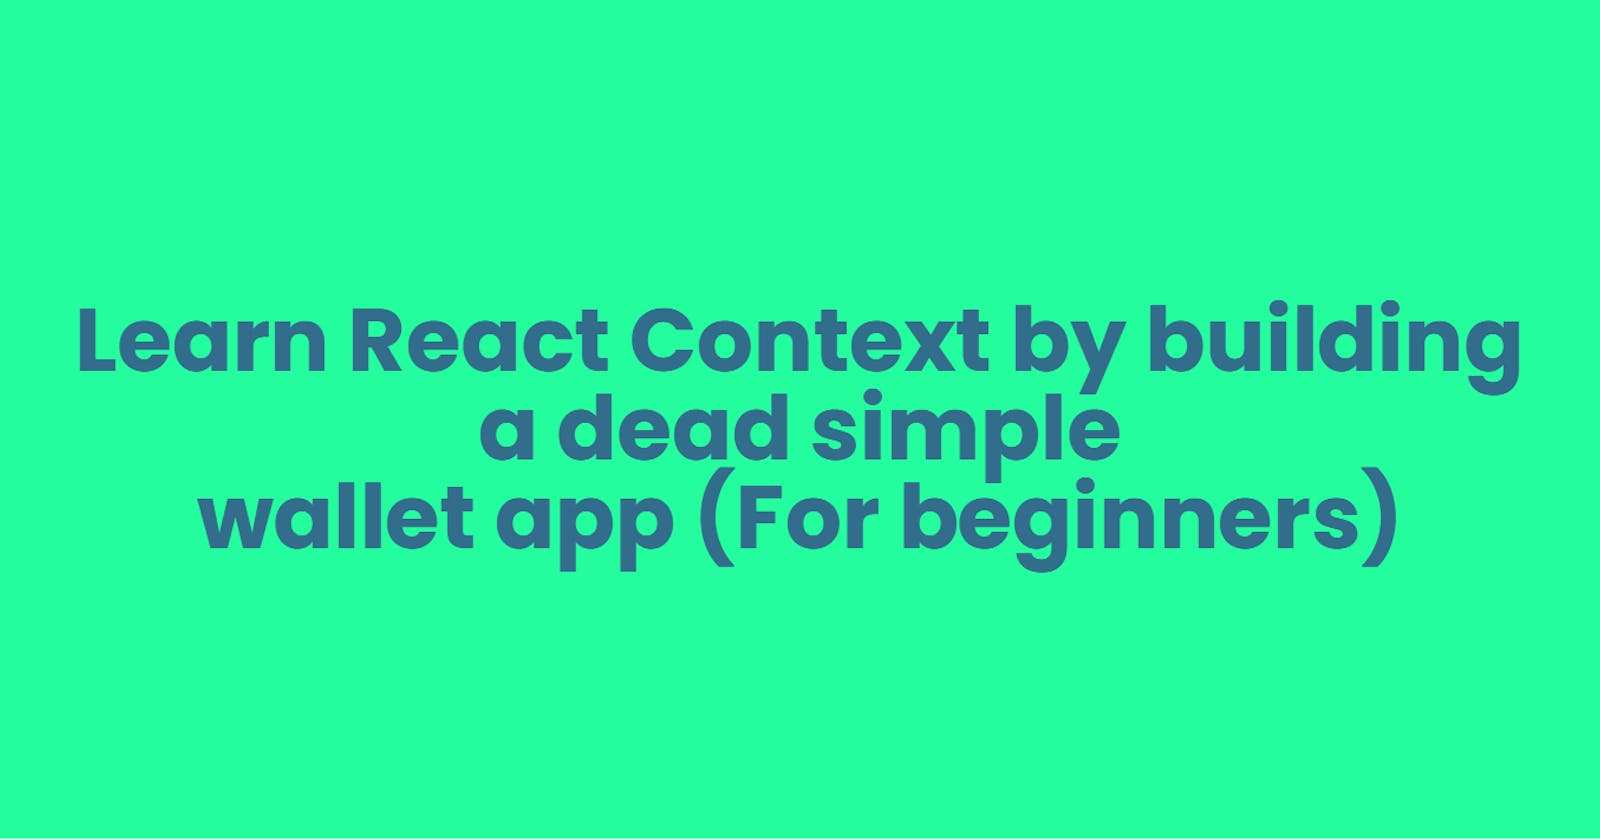 Learn React Context by building a dead simple wallet app (For beginners)